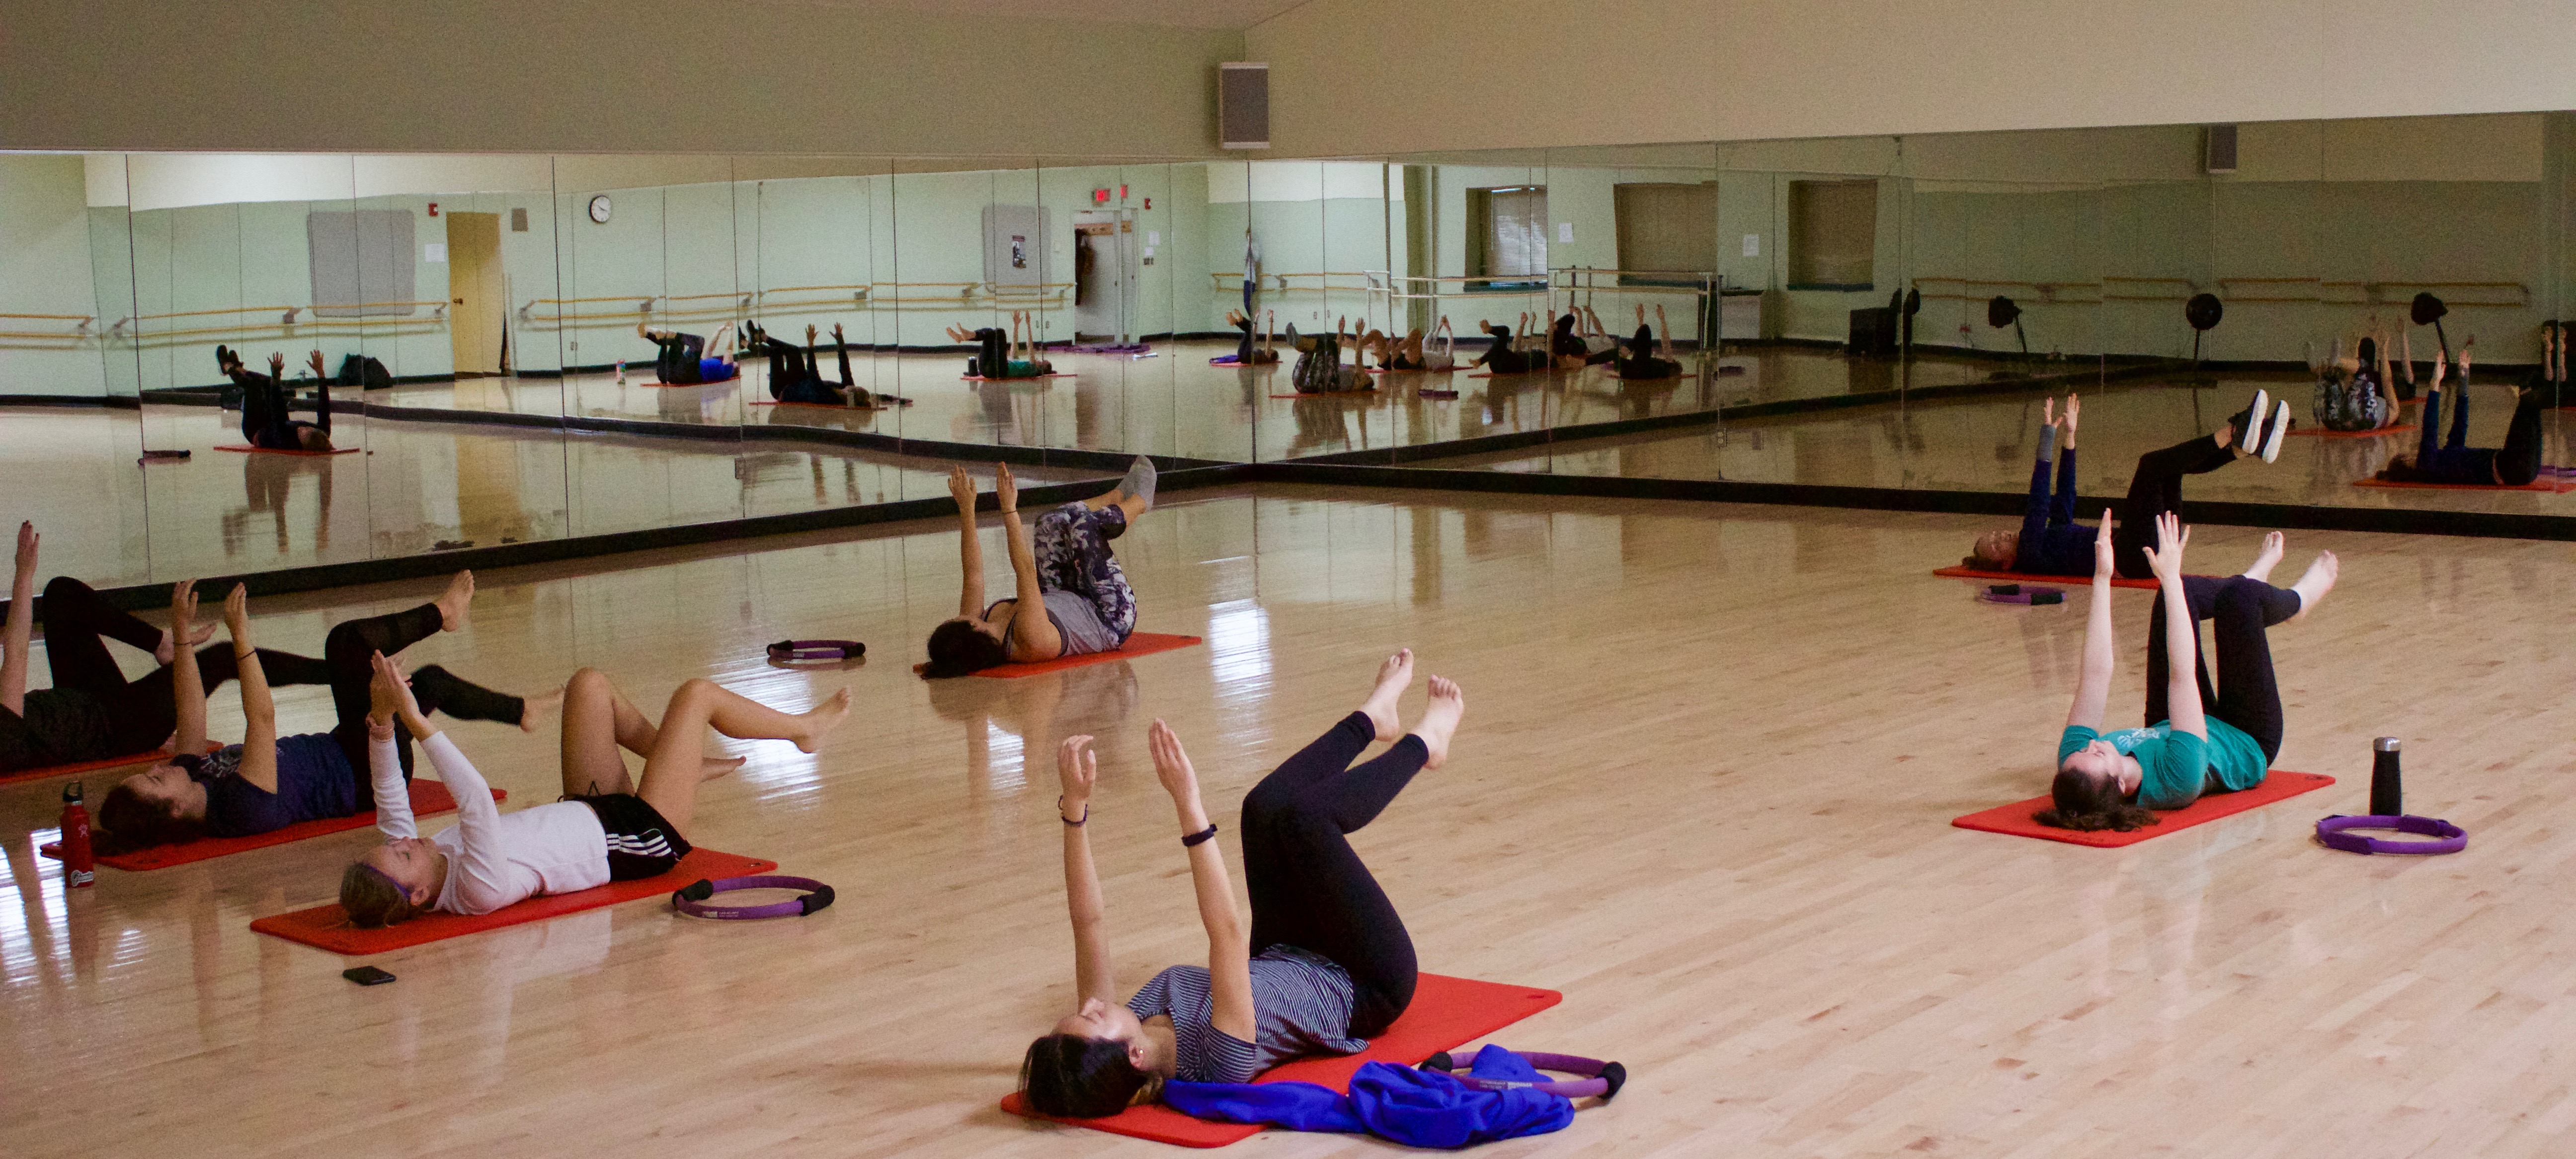 students stretching during a Pilates class